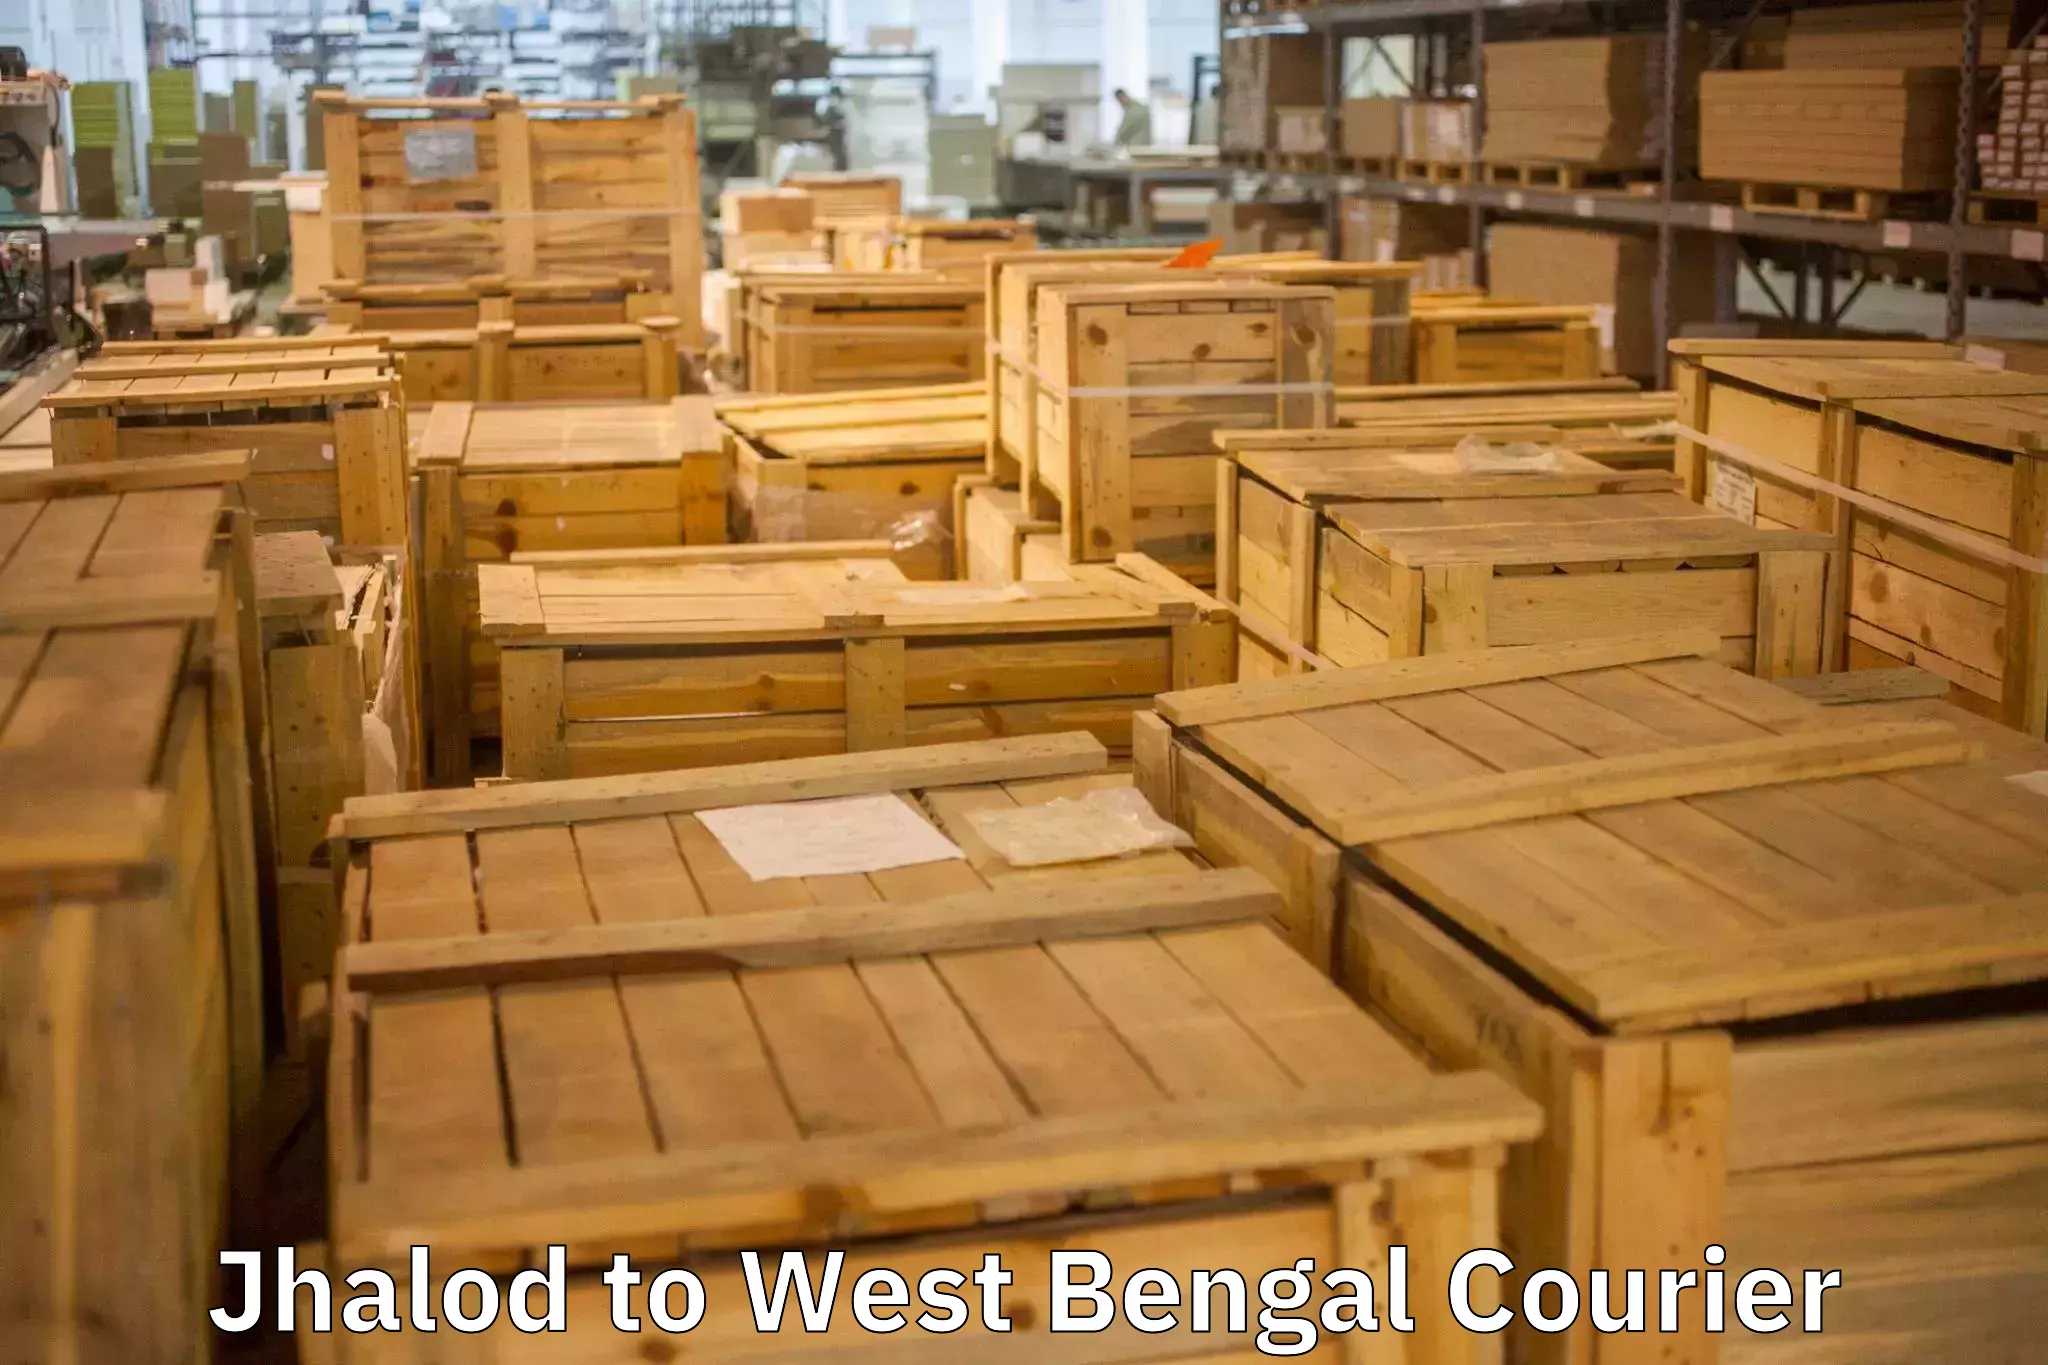 Furniture transport professionals Jhalod to West Bengal